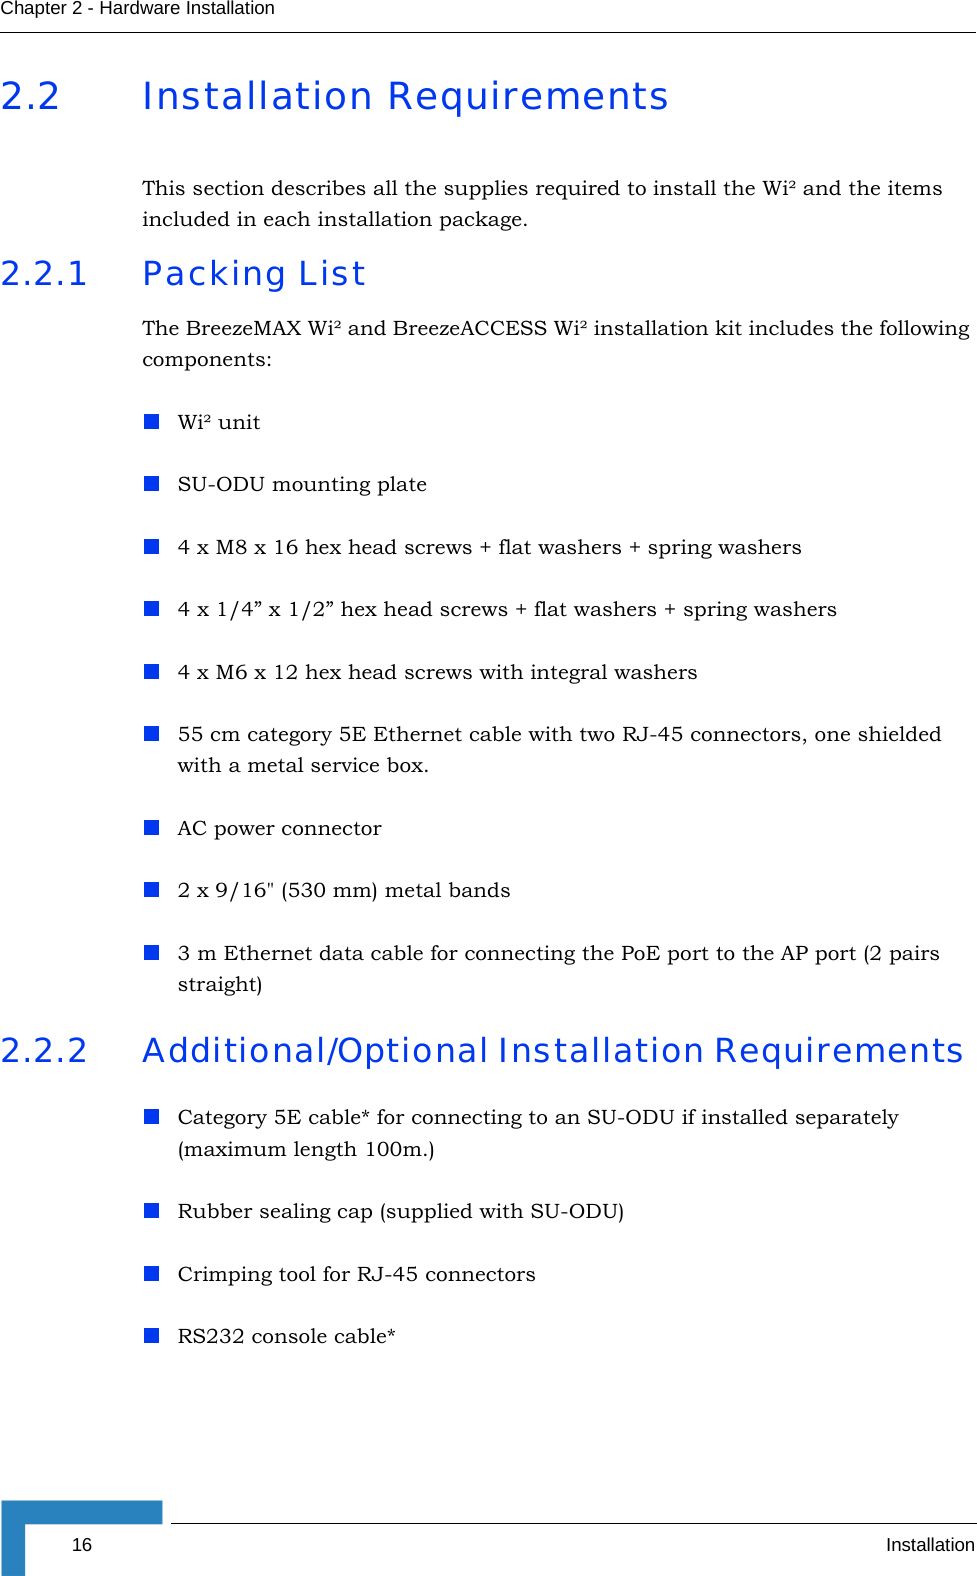 16 InstallationChapter 2 - Hardware Installation2.2 Installation RequirementsThis section describes all the supplies required to install the Wi² and the items included in each installation package. 2.2.1 Packing ListThe BreezeMAX Wi² and BreezeACCESS Wi² installation kit includes the following components:Wi² unitSU-ODU mounting plate4 x M8 x 16 hex head screws + flat washers + spring washers4 x 1/4” x 1/2” hex head screws + flat washers + spring washers4 x M6 x 12 hex head screws with integral washers 55 cm category 5E Ethernet cable with two RJ-45 connectors, one shielded with a metal service box.  AC power connector 2 x 9/16&quot; (530 mm) metal bands3 m Ethernet data cable for connecting the PoE port to the AP port (2 pairs straight)2.2.2 Additional/Optional Installation Requirements Category 5E cable* for connecting to an SU-ODU if installed separately (maximum length 100m.) Rubber sealing cap (supplied with SU-ODU)Crimping tool for RJ-45 connectorsRS232 console cable* 